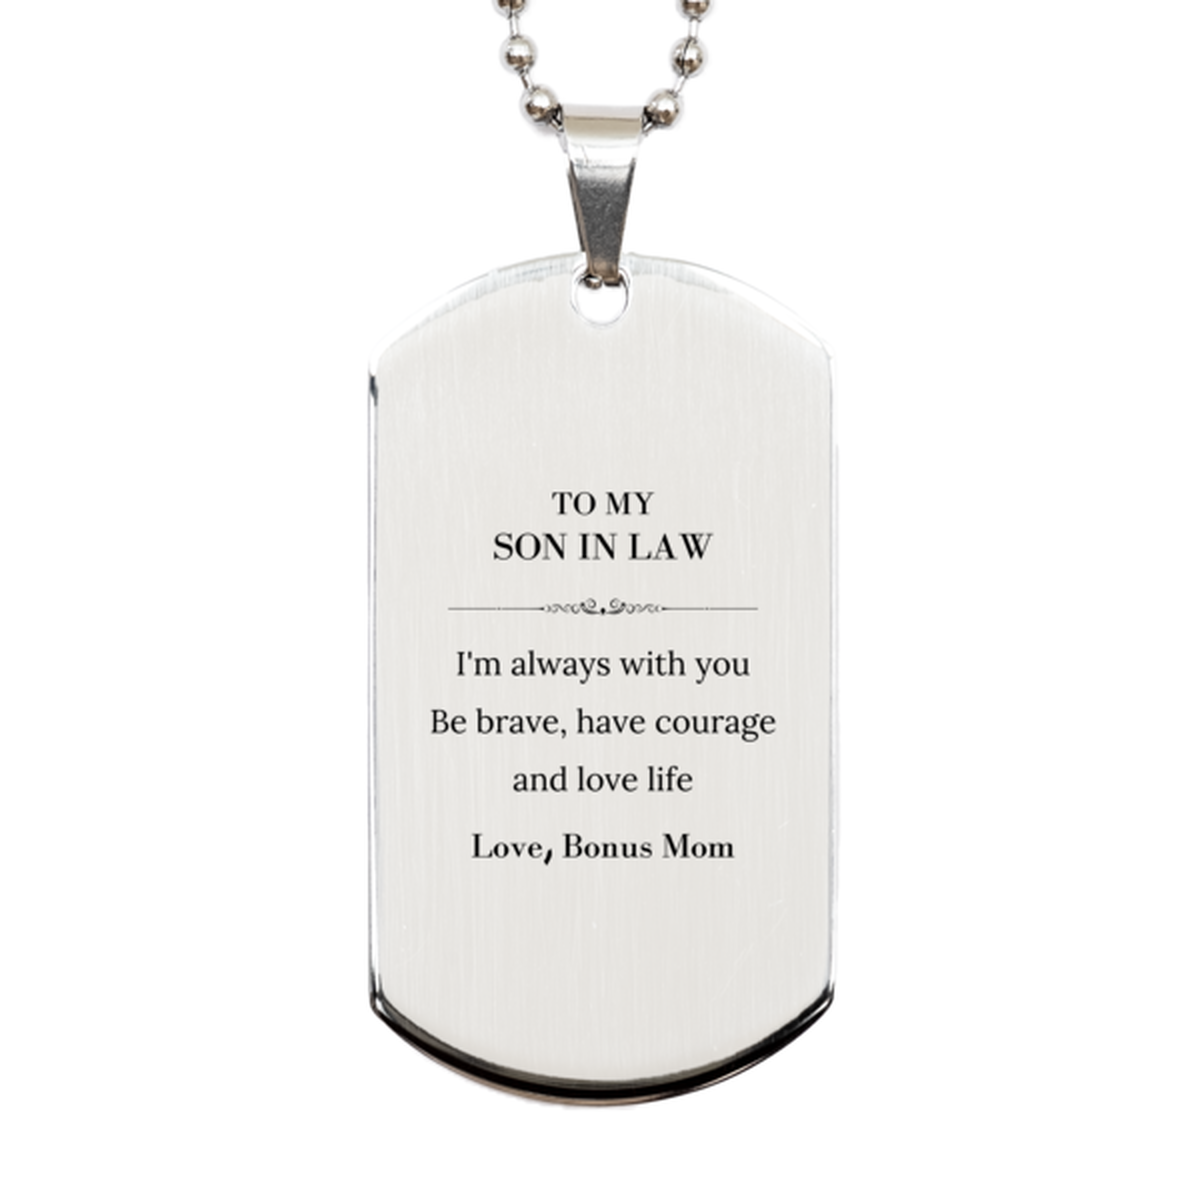 To My Son In Law Gifts from Bonus Mom, Unique Silver Dog Tag Inspirational Christmas Birthday Graduation Gifts for Son In Law I'm always with you. Be brave, have courage and love life. Love, Bonus Mom